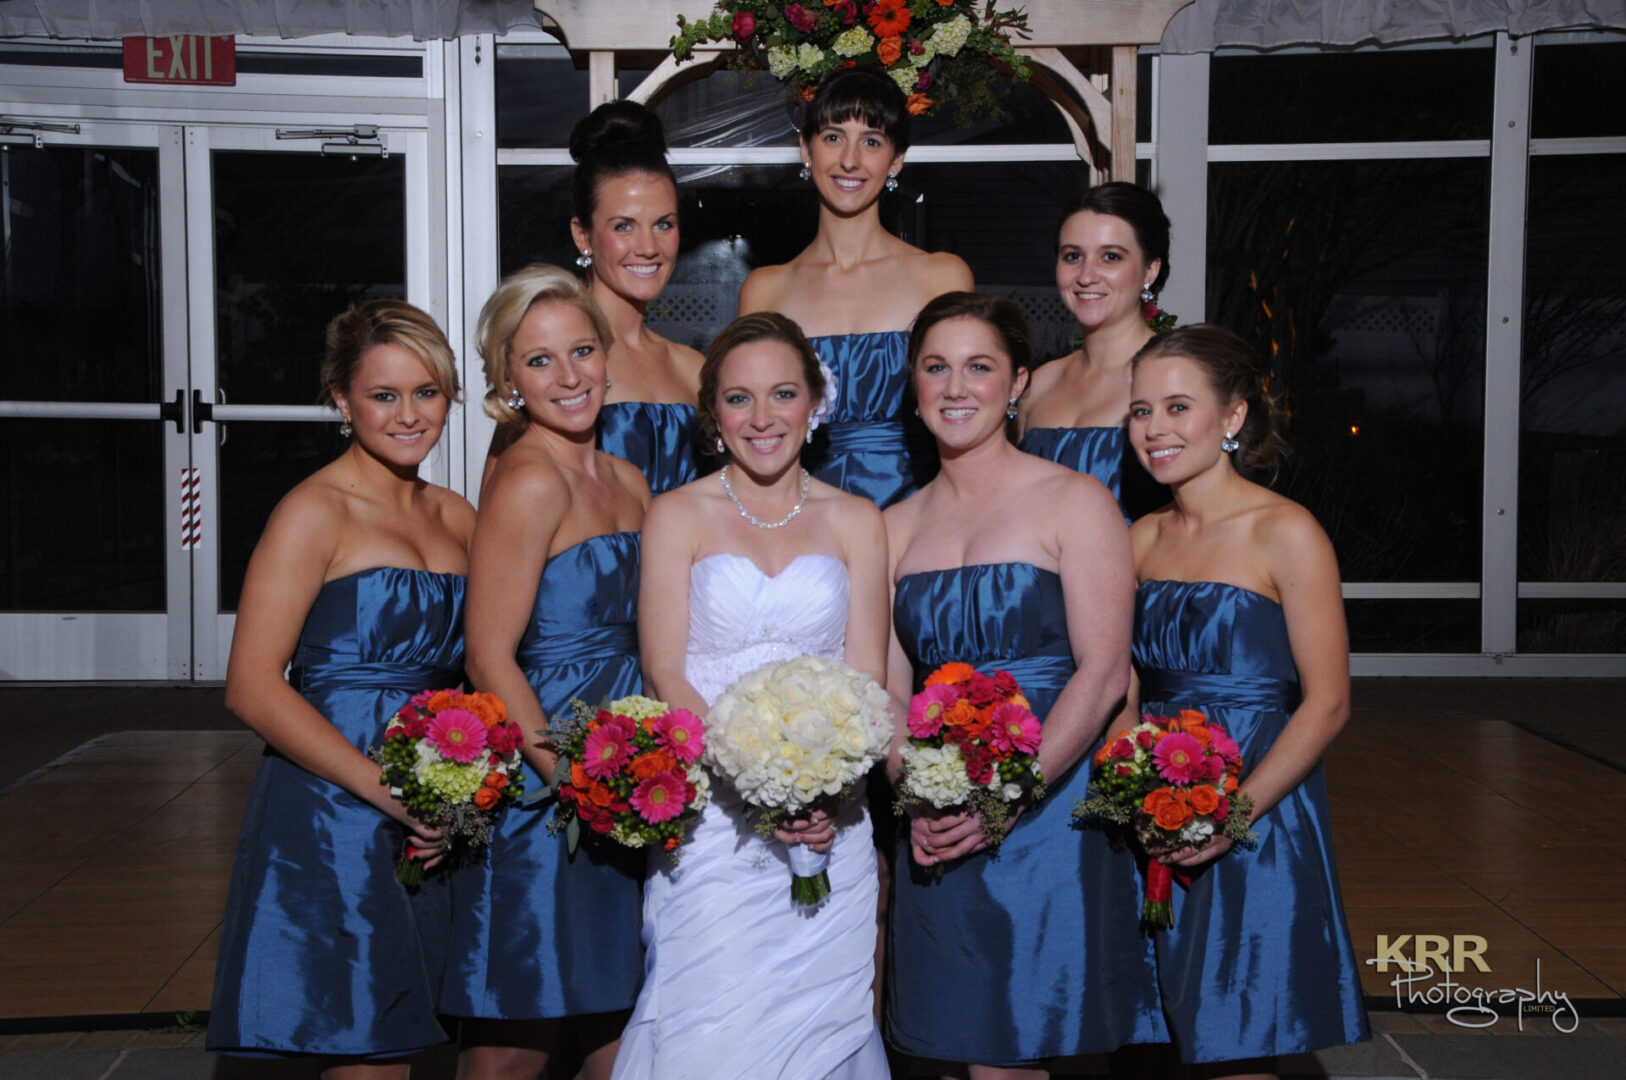 A group of bridesmaids posing for a picture.